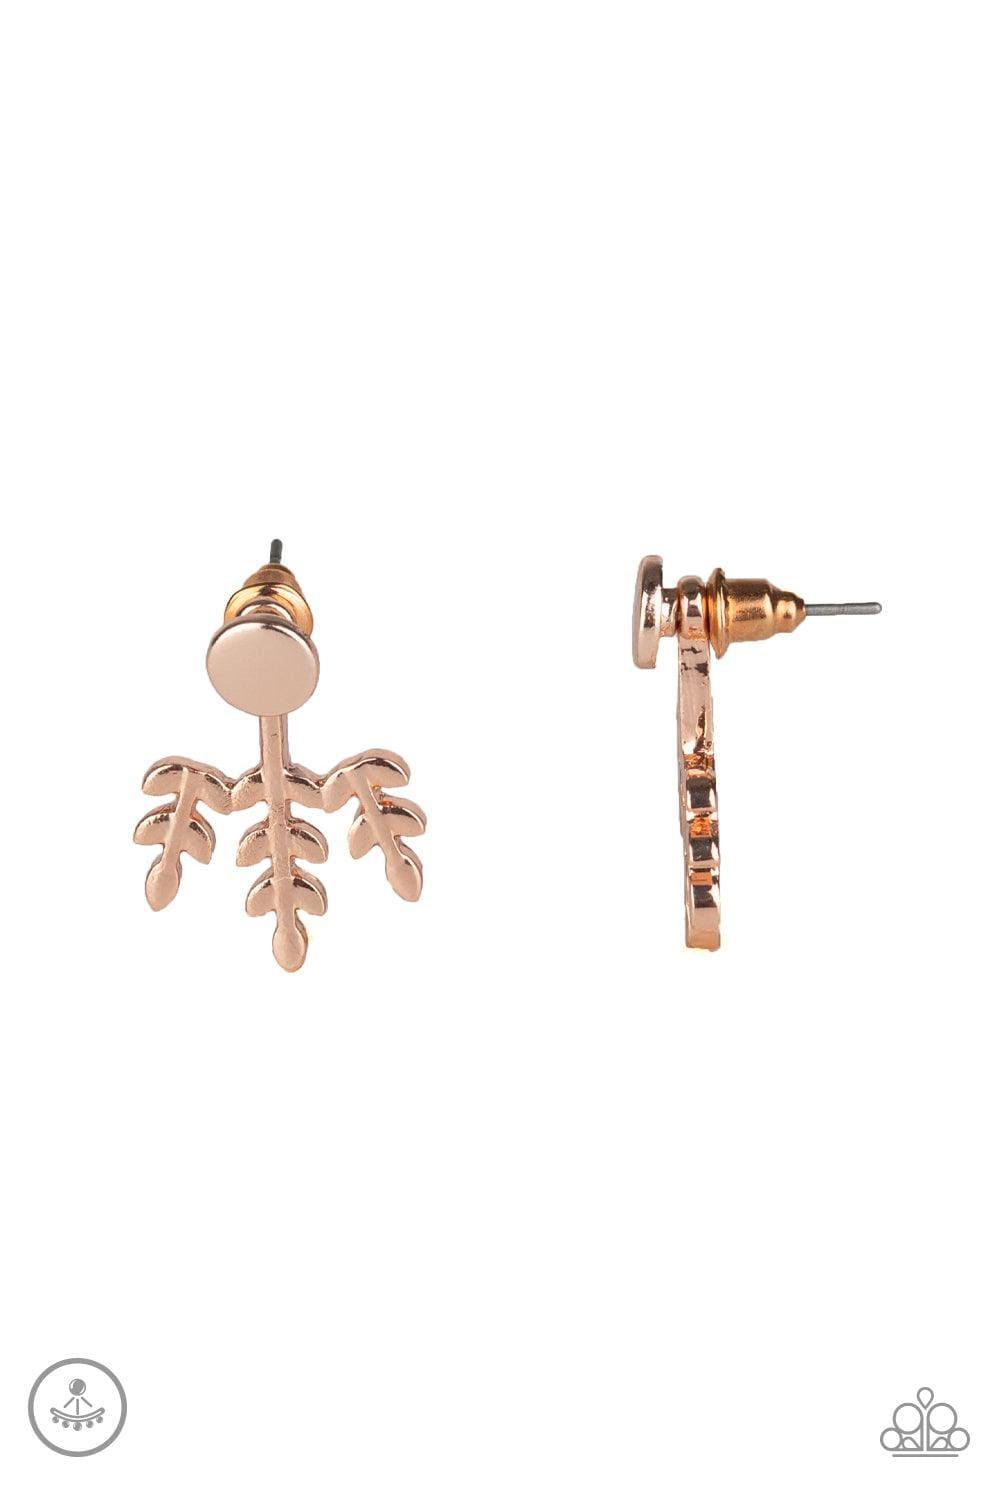 Paparazzi Accessories - Autumn Shimmer - Rose Gold Earrings - Bling by JessieK